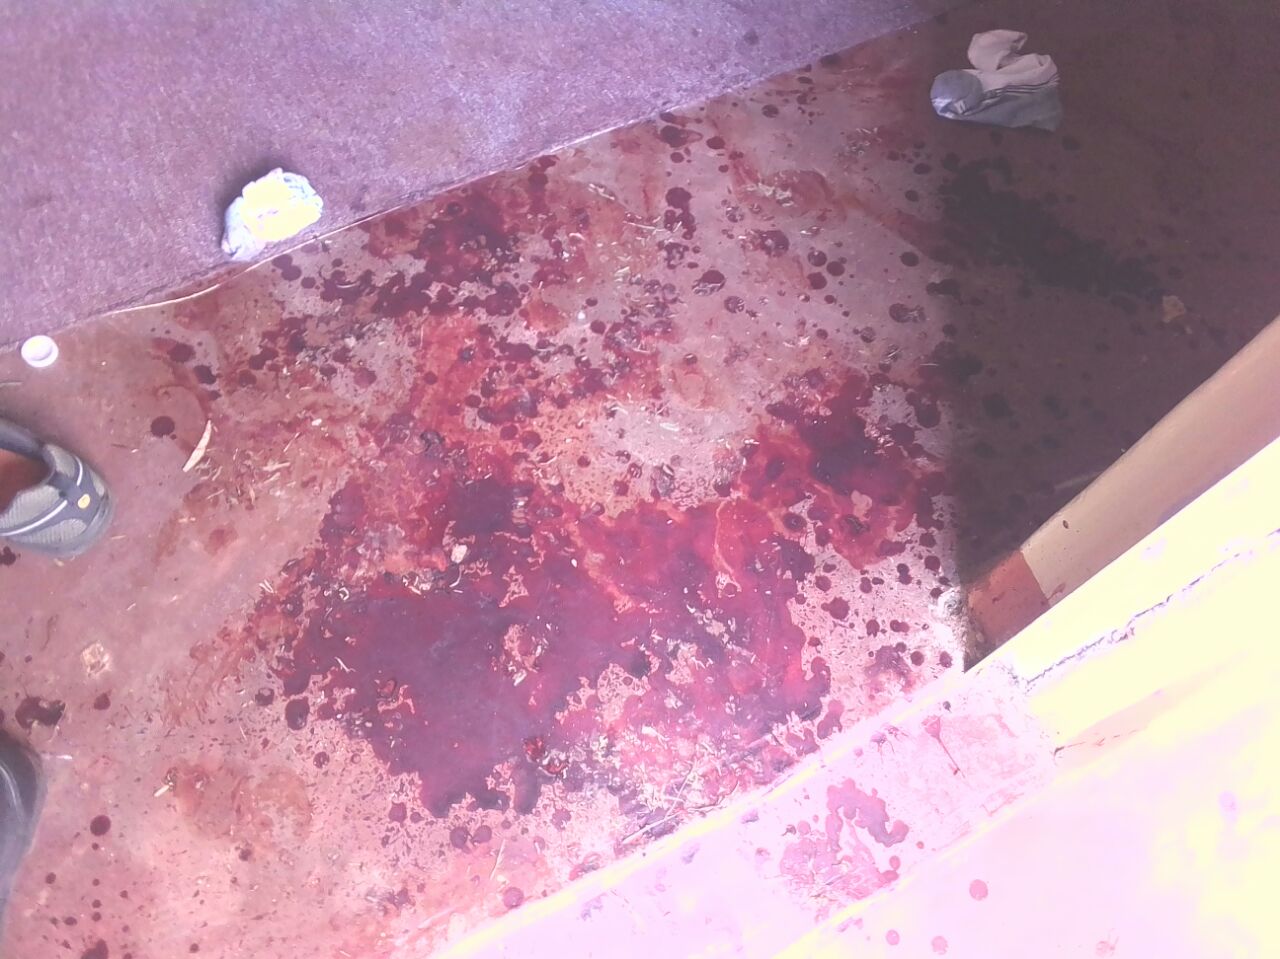 The bloody scene of the attack